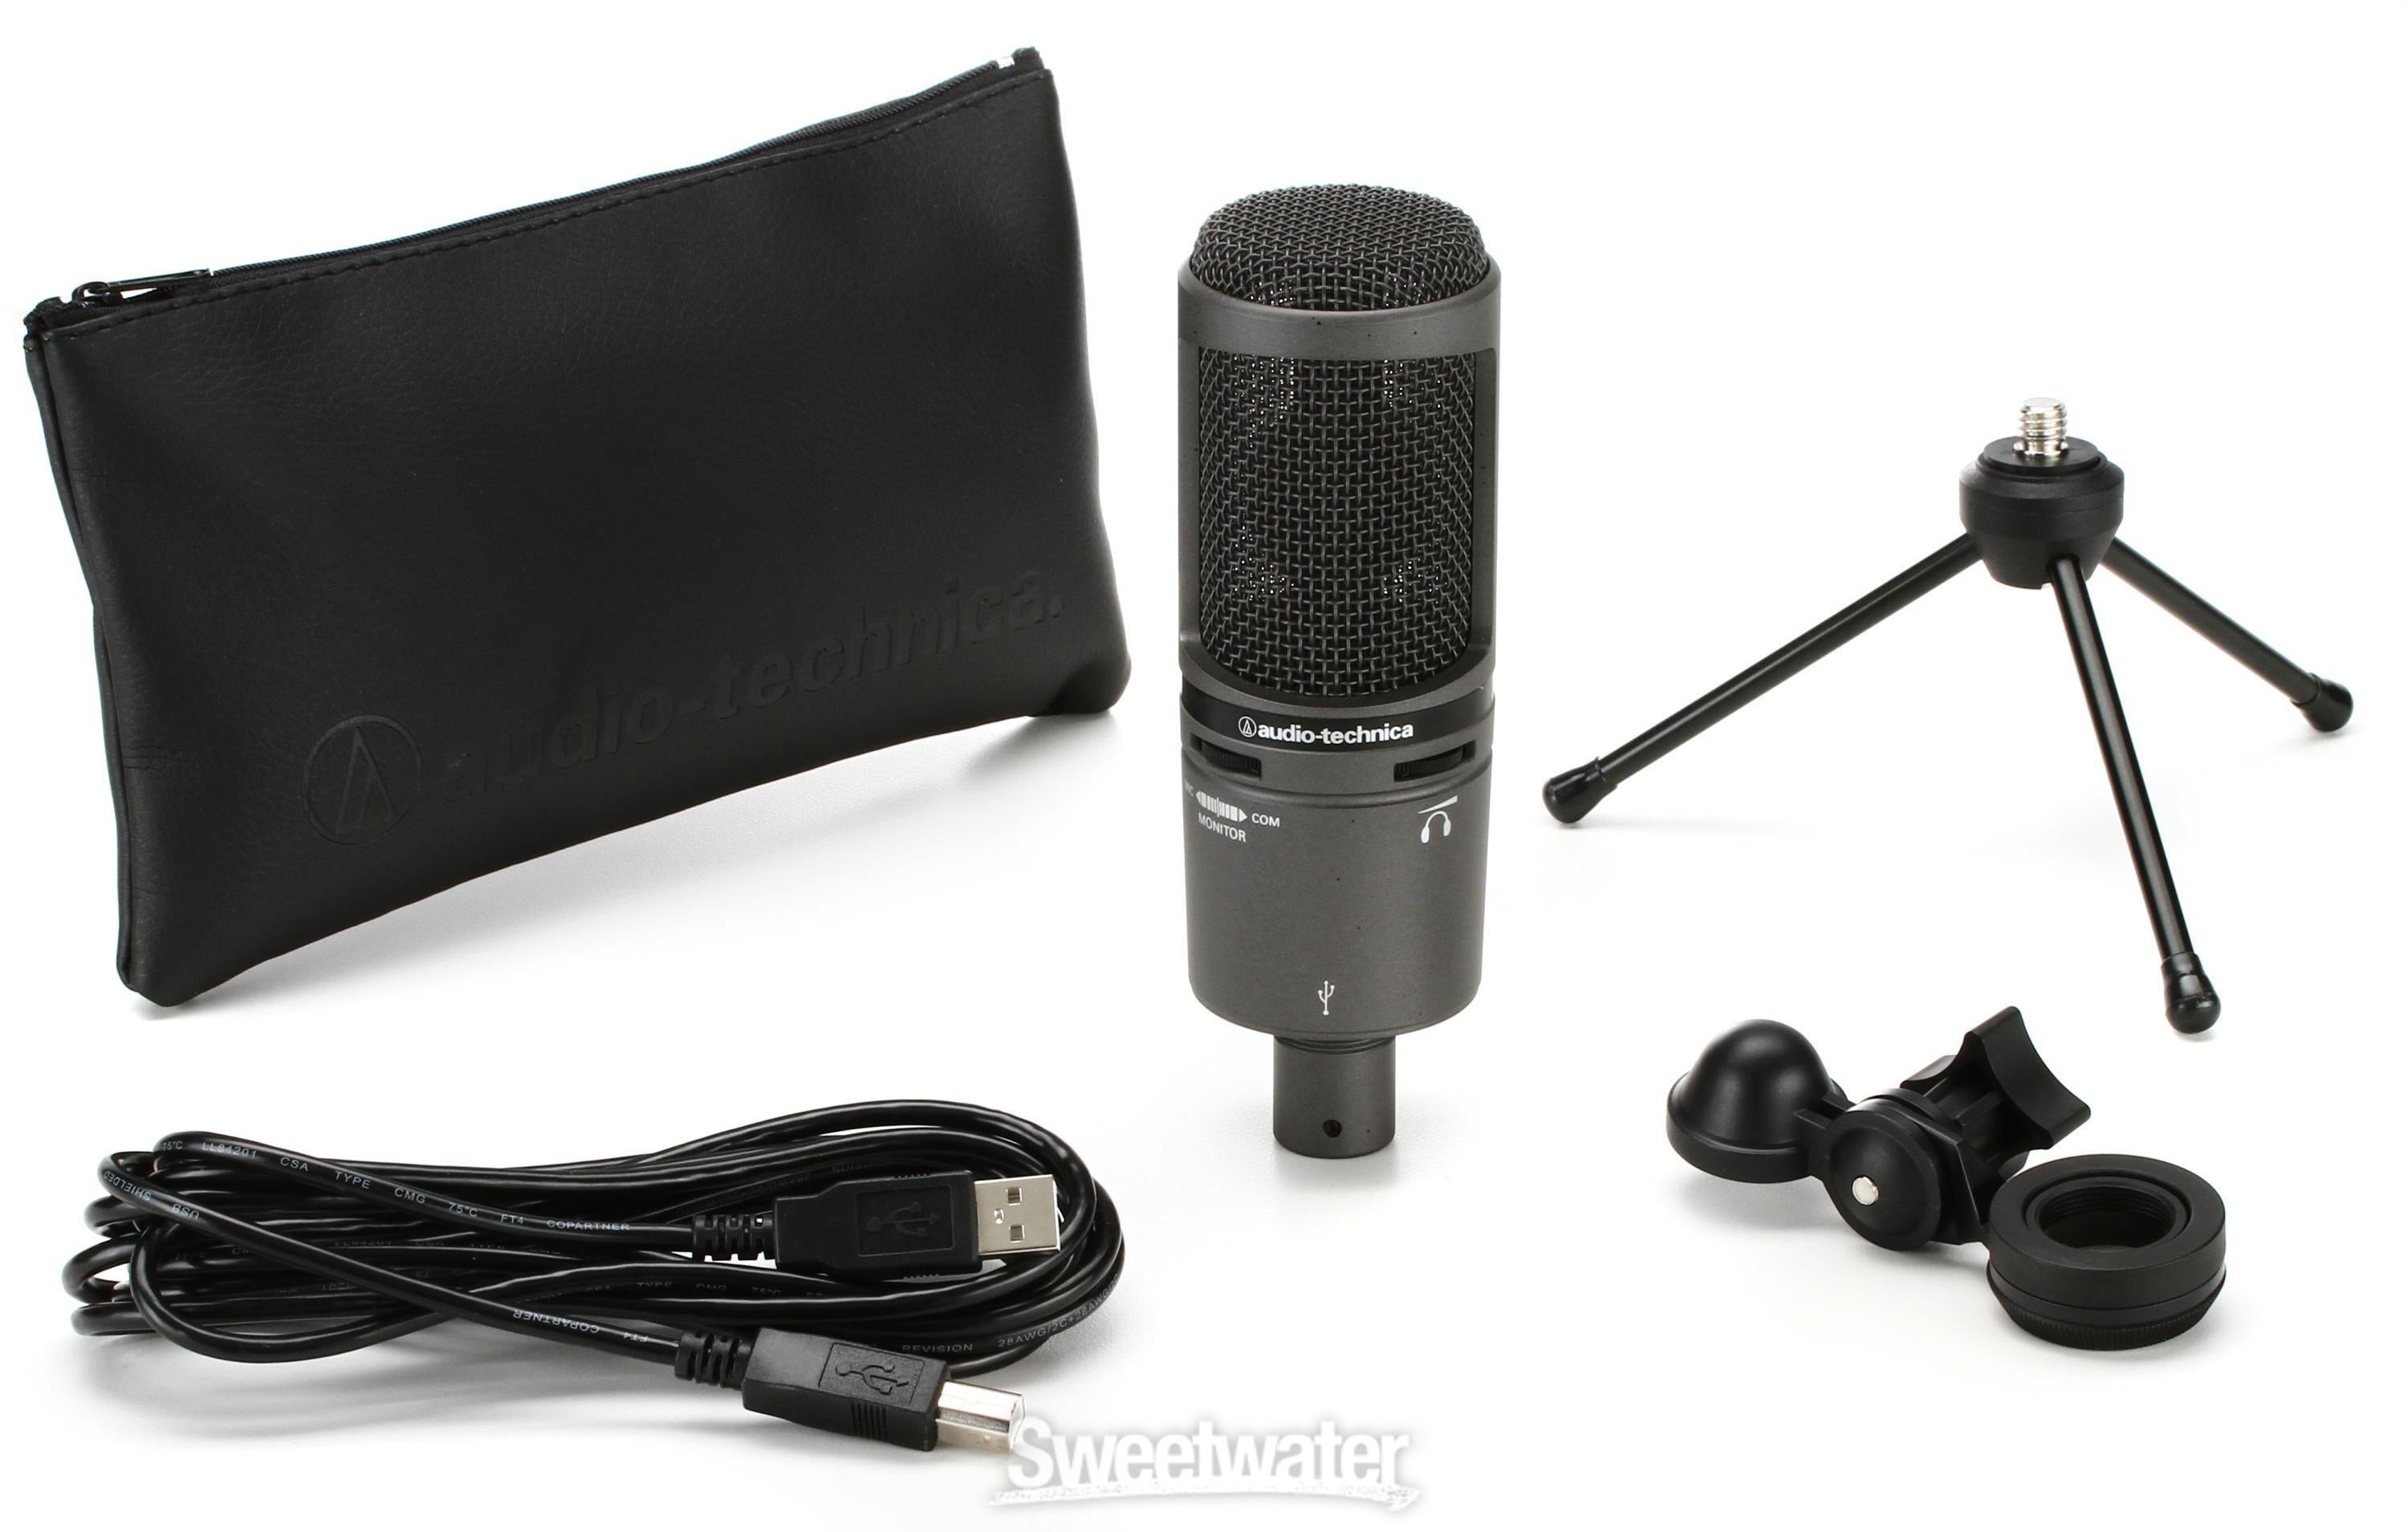 AT2020USB+ Cardioid Condenser USB Microphone - Sweetwater